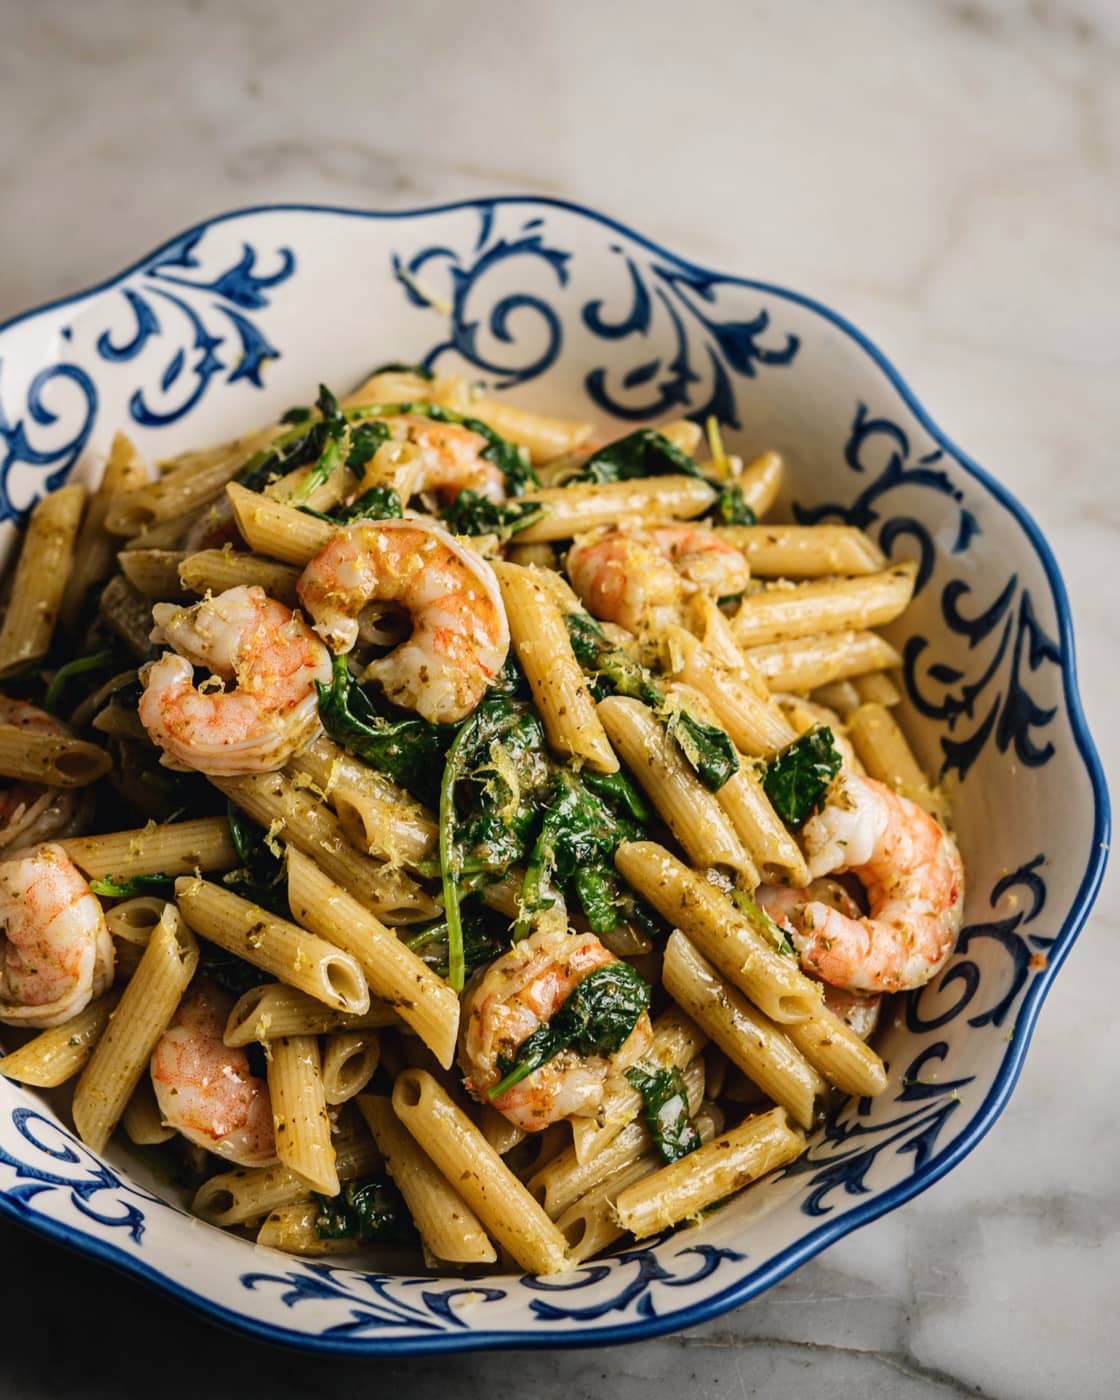 PENNE WITH SHRIMP AND BASIL PESTO